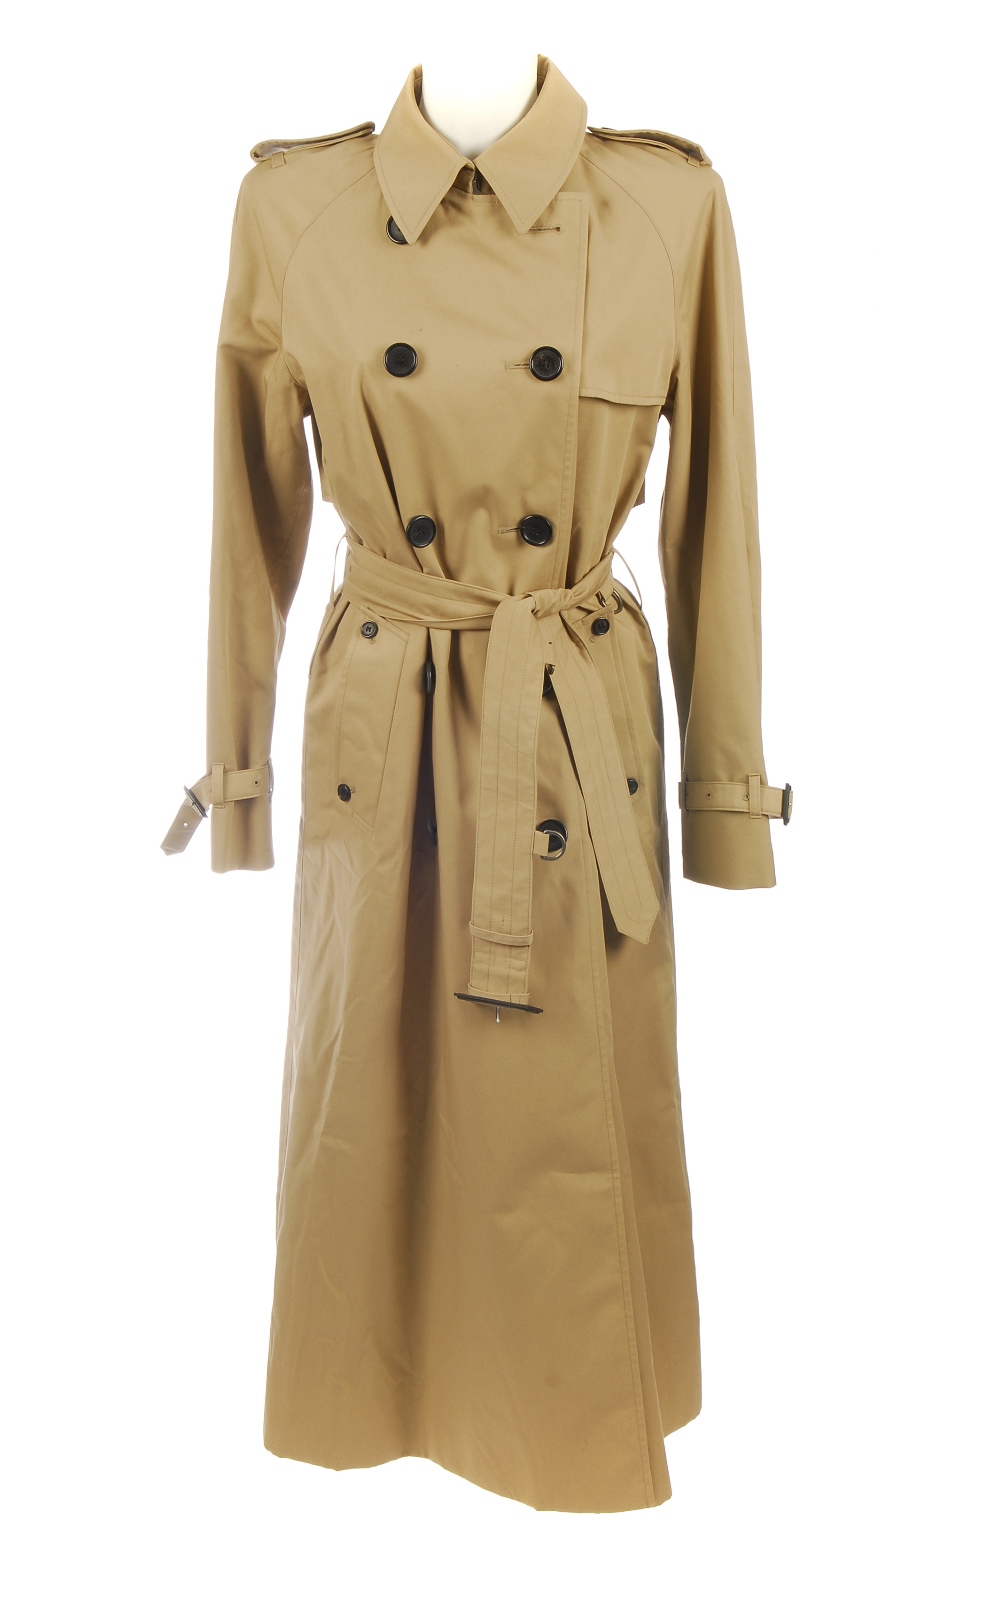 AQUASCUTUM - a woman's classic beige full-length trench coat. Designed with a notched lapel